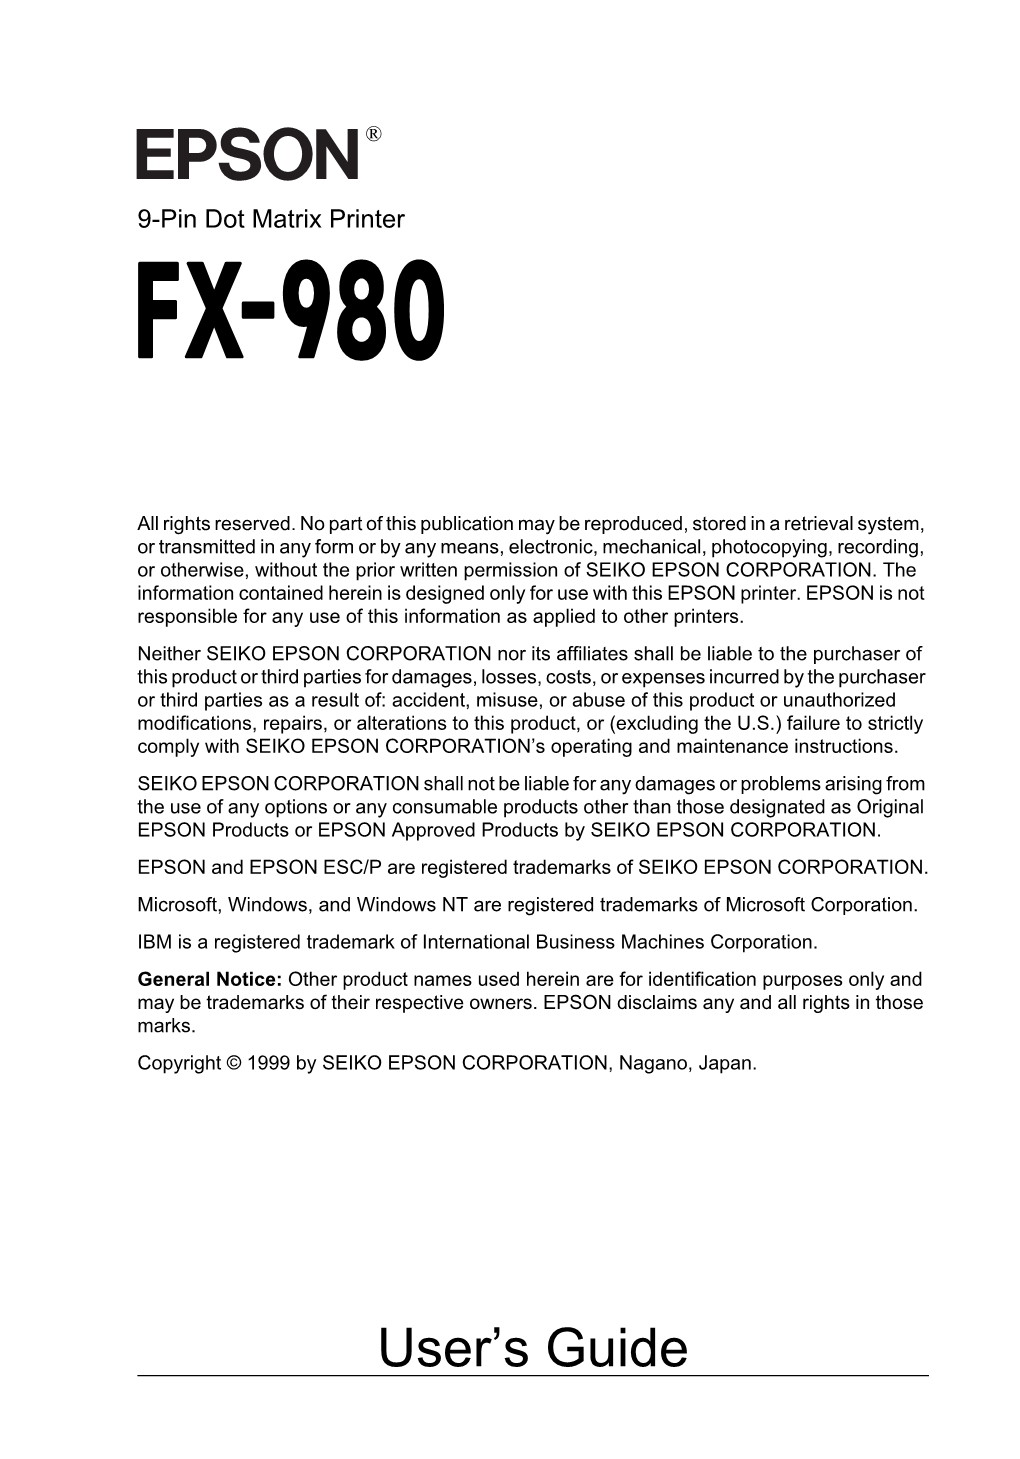 EPSON FX-980 Printer at the Appropriate Step in the Setup Or Installation Procedure